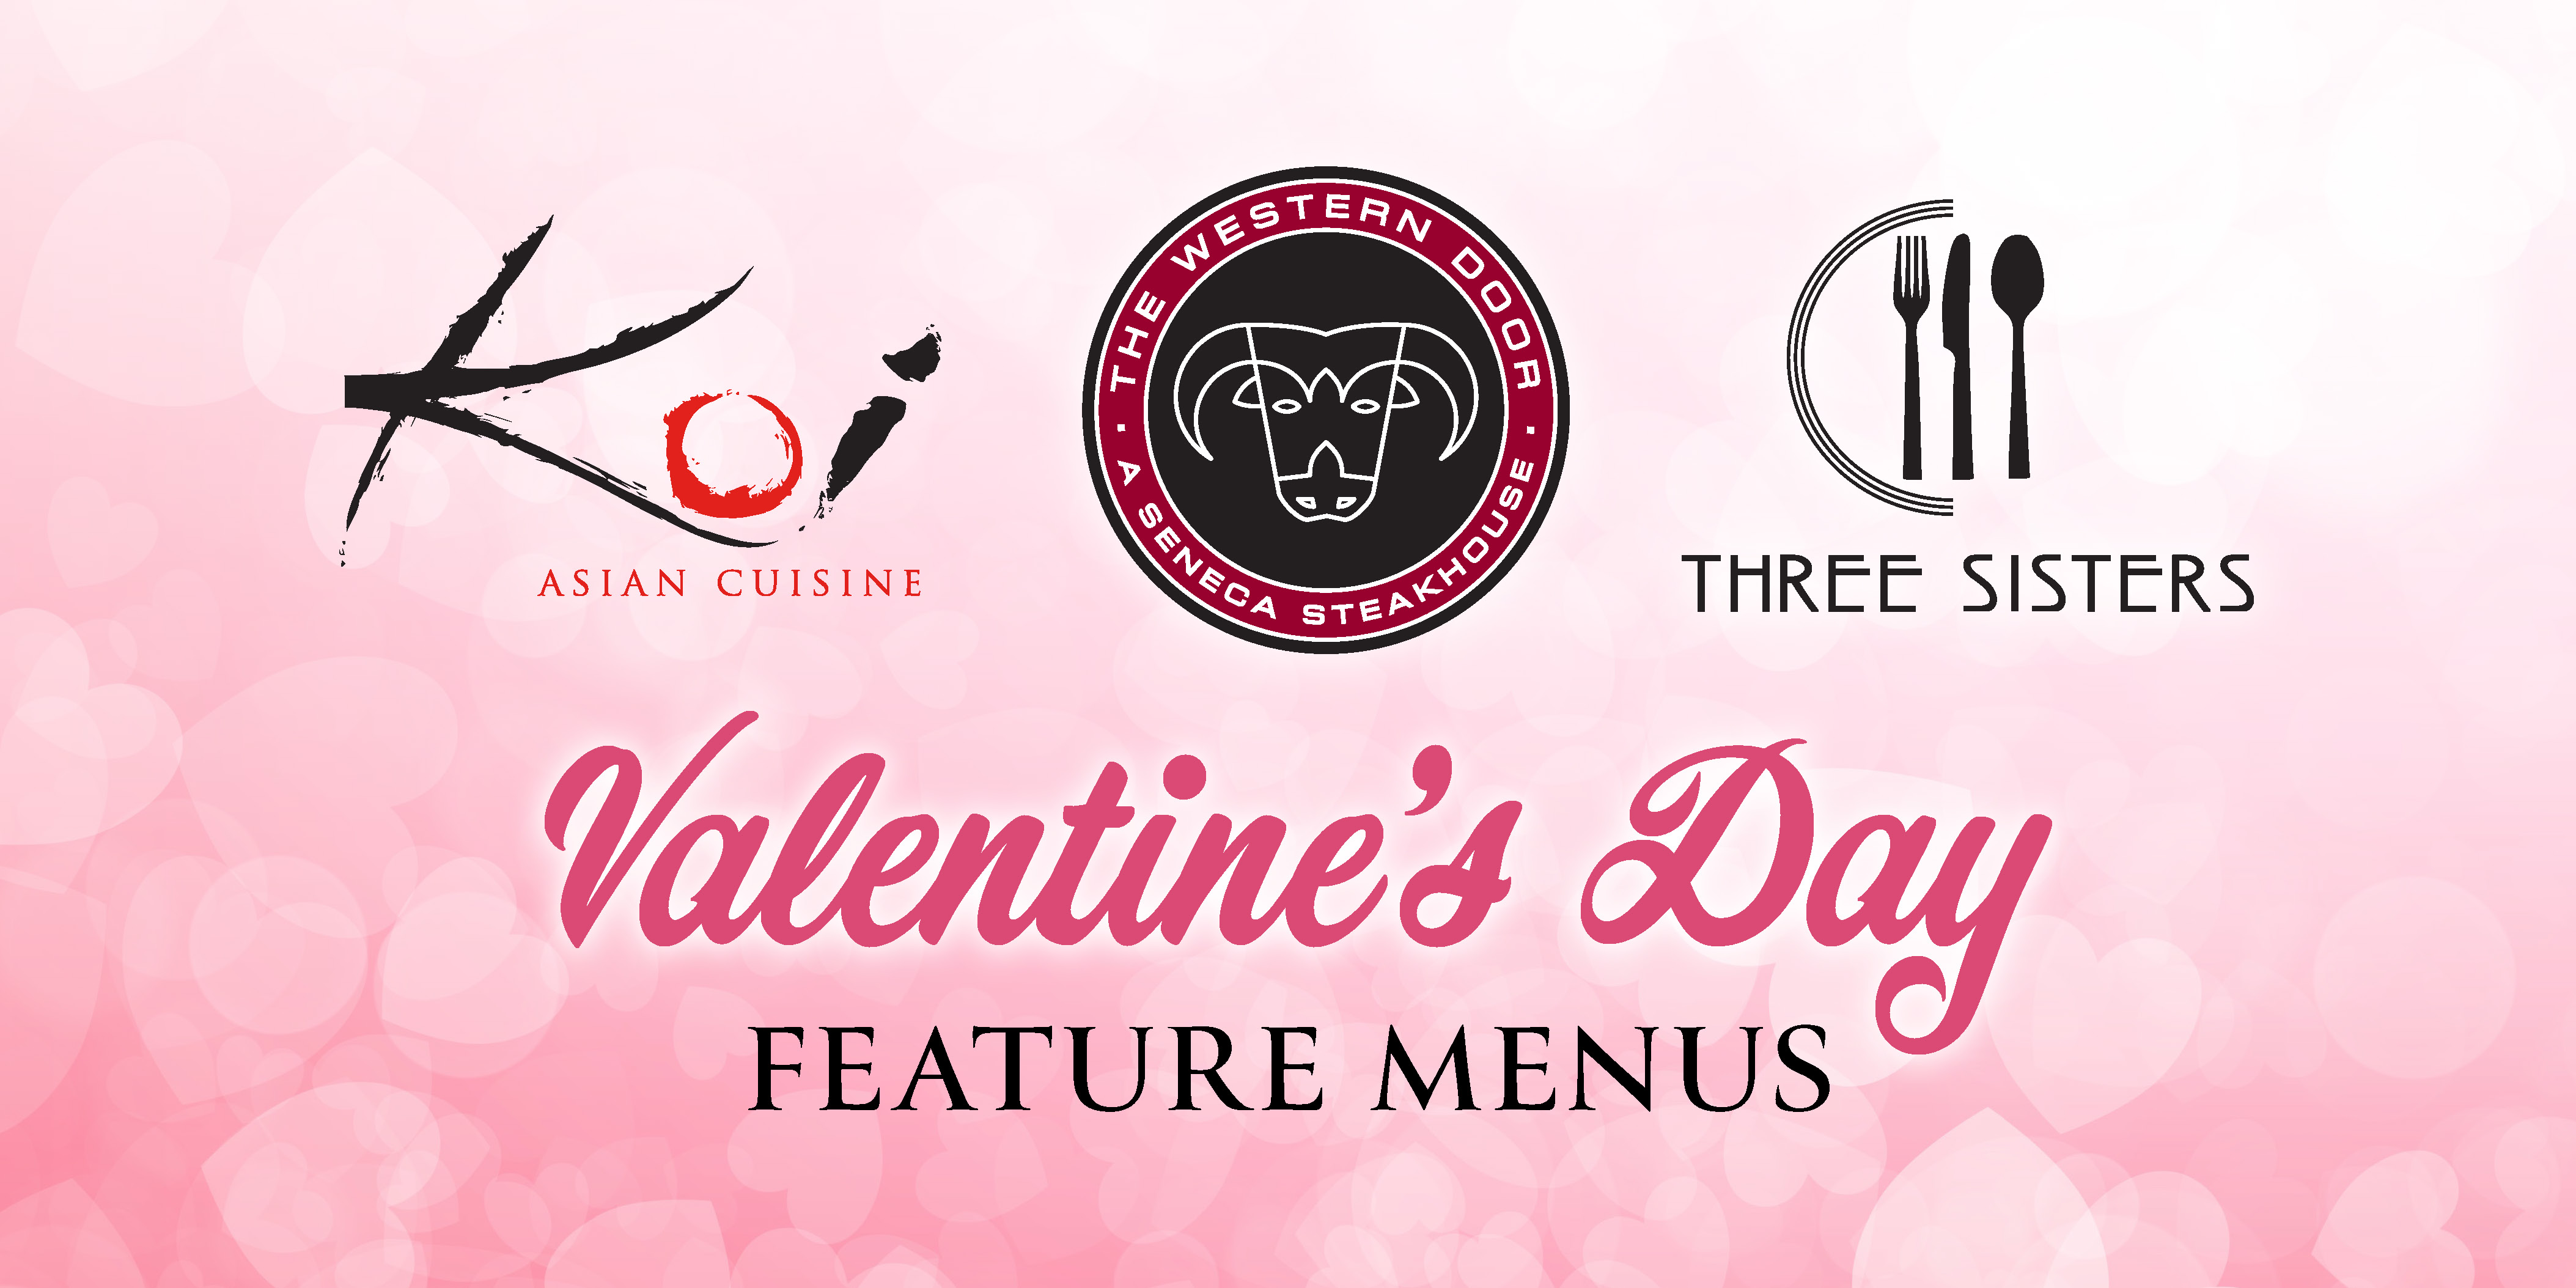 Celebrate Love With A Special Dinner!